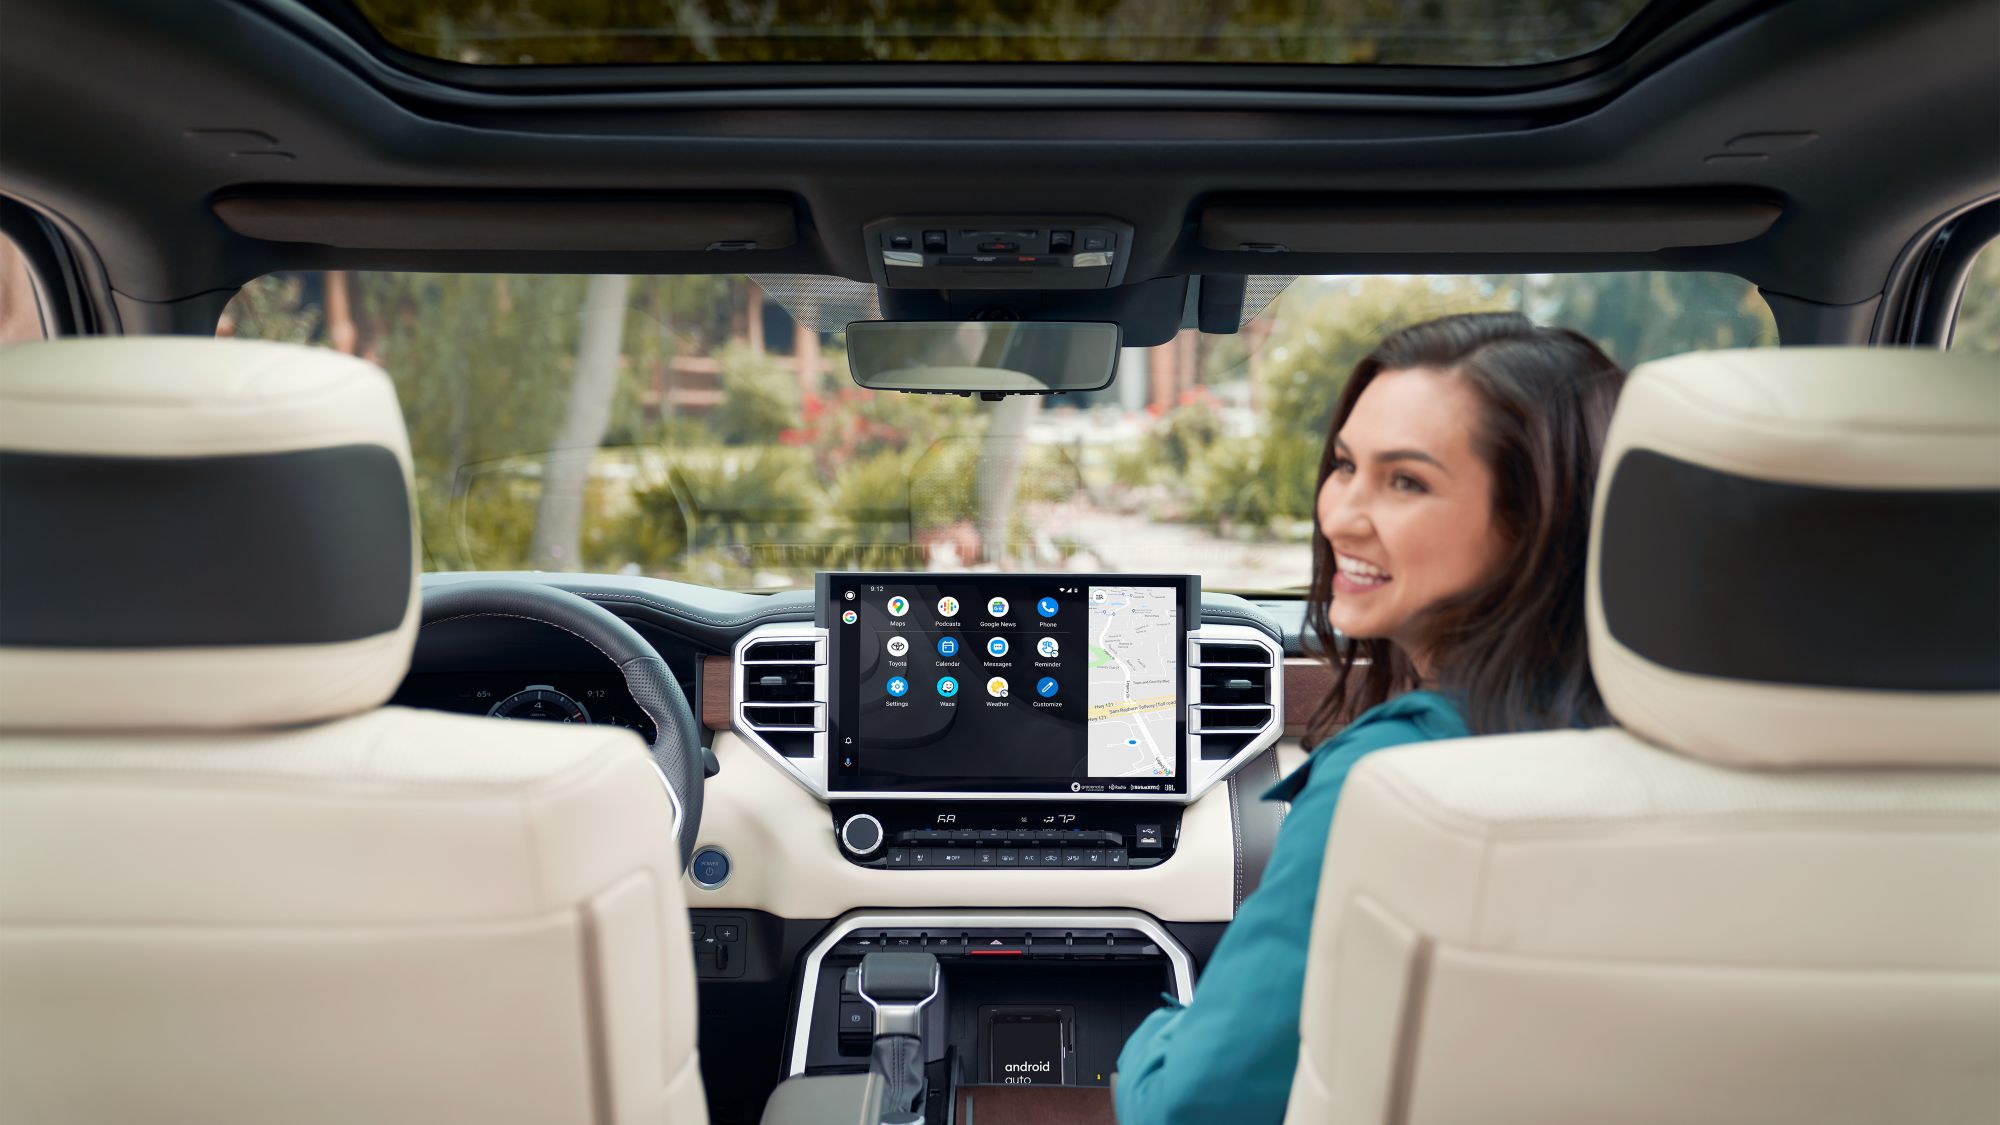 Interior view looking out the front of a Toyota from the backseat. A woman is sitting in the passenger seat and looking back. A touchscreen featuring the Android Auto UI is in the center of the frame.